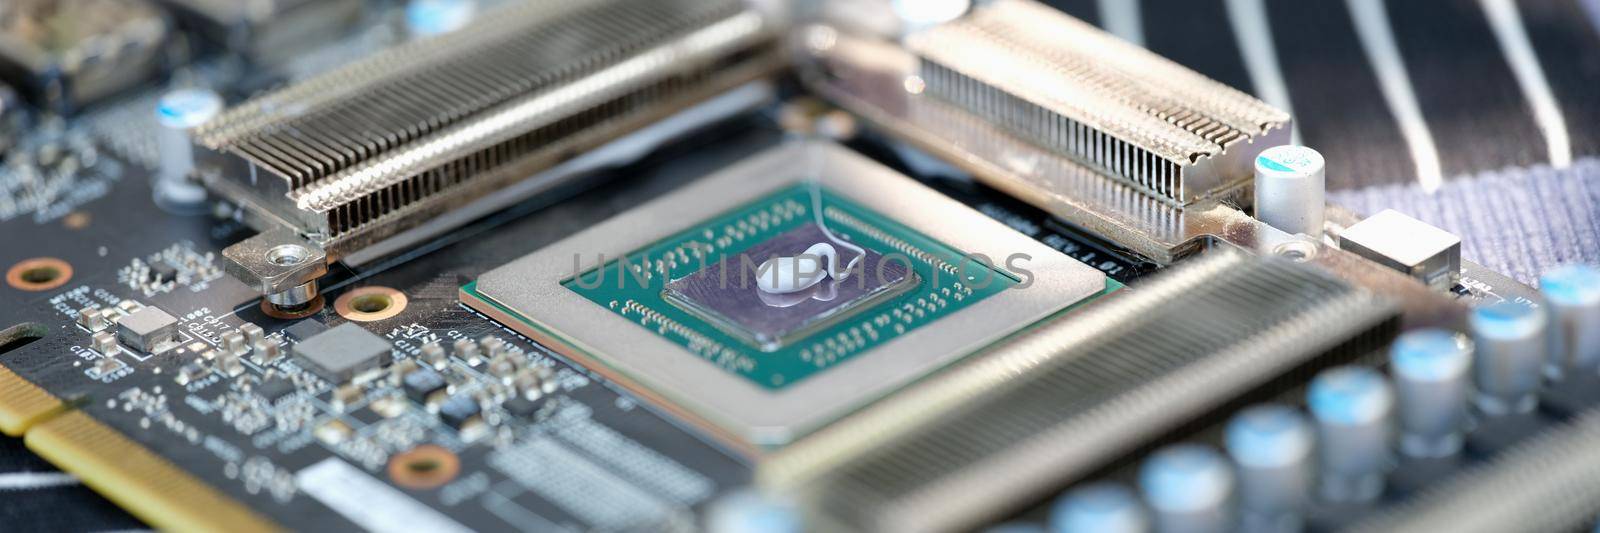 Cpu microchip processor with thermal paste closeup by kuprevich